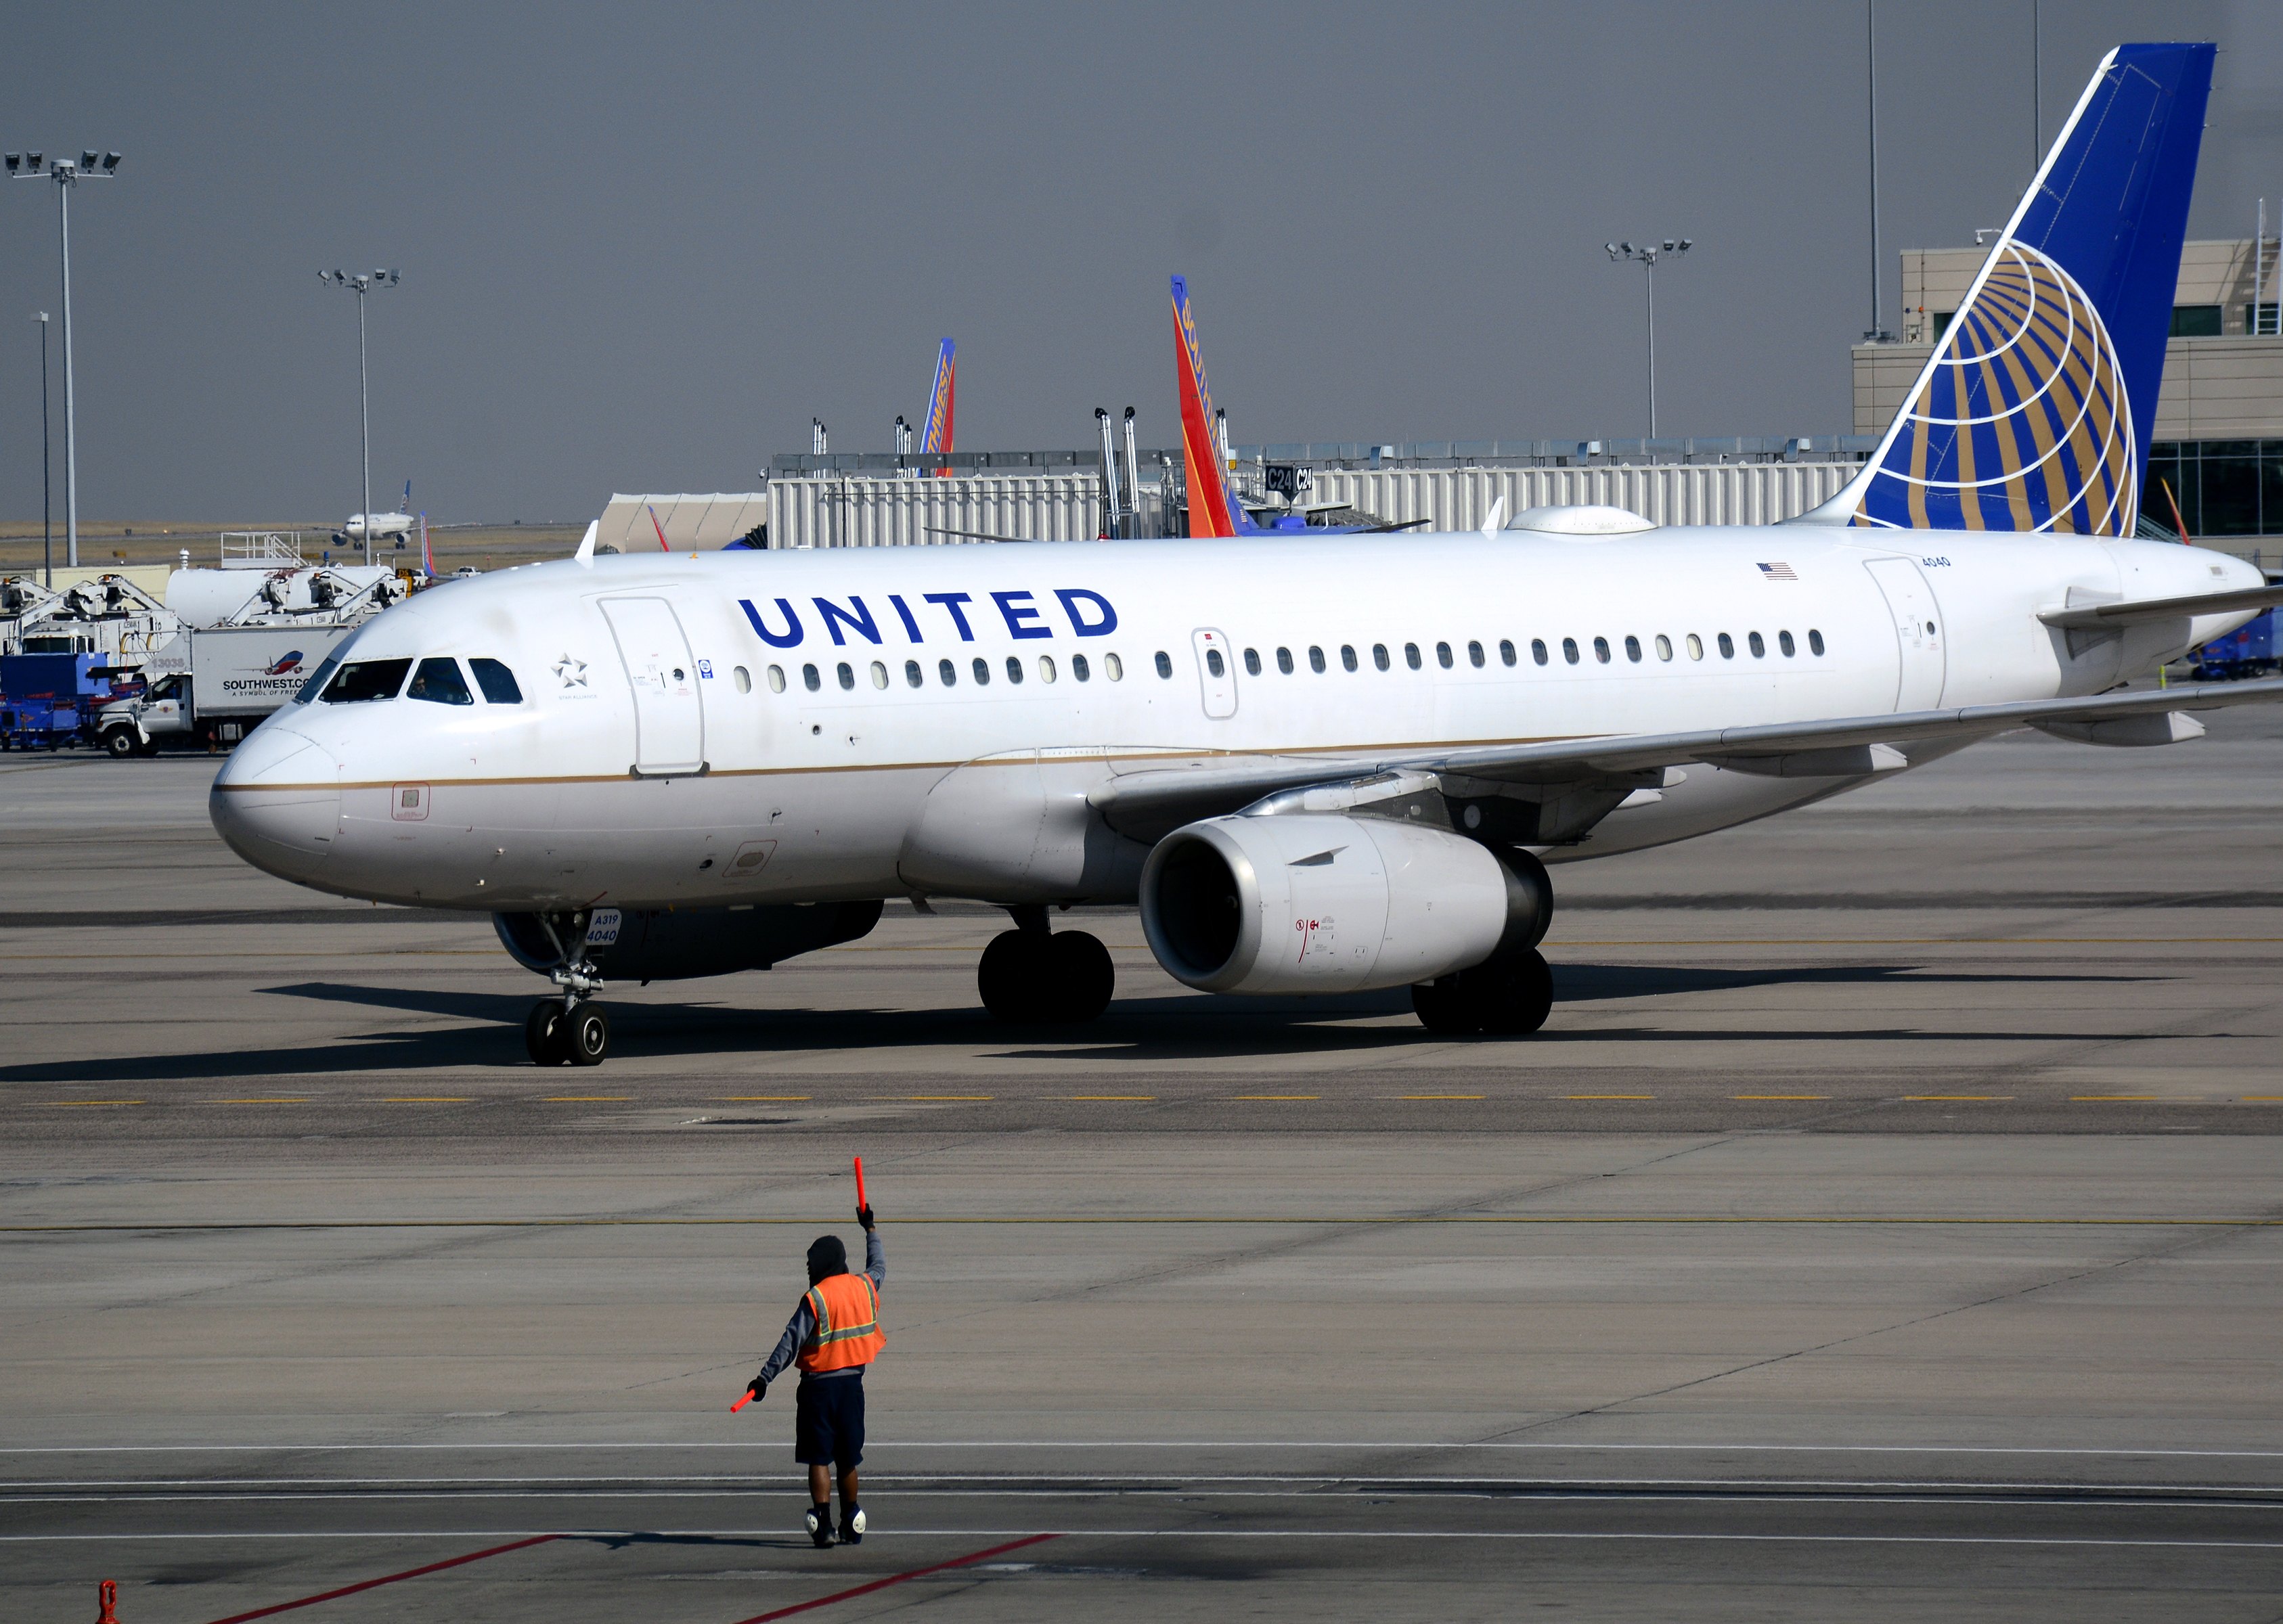 A United Airlines Airbus A319 passenger plane taxis toward a gate at Denver International Airport in Denver, Colo., on Aug. 25, 2016. (Robert Alexander—Getty Images)